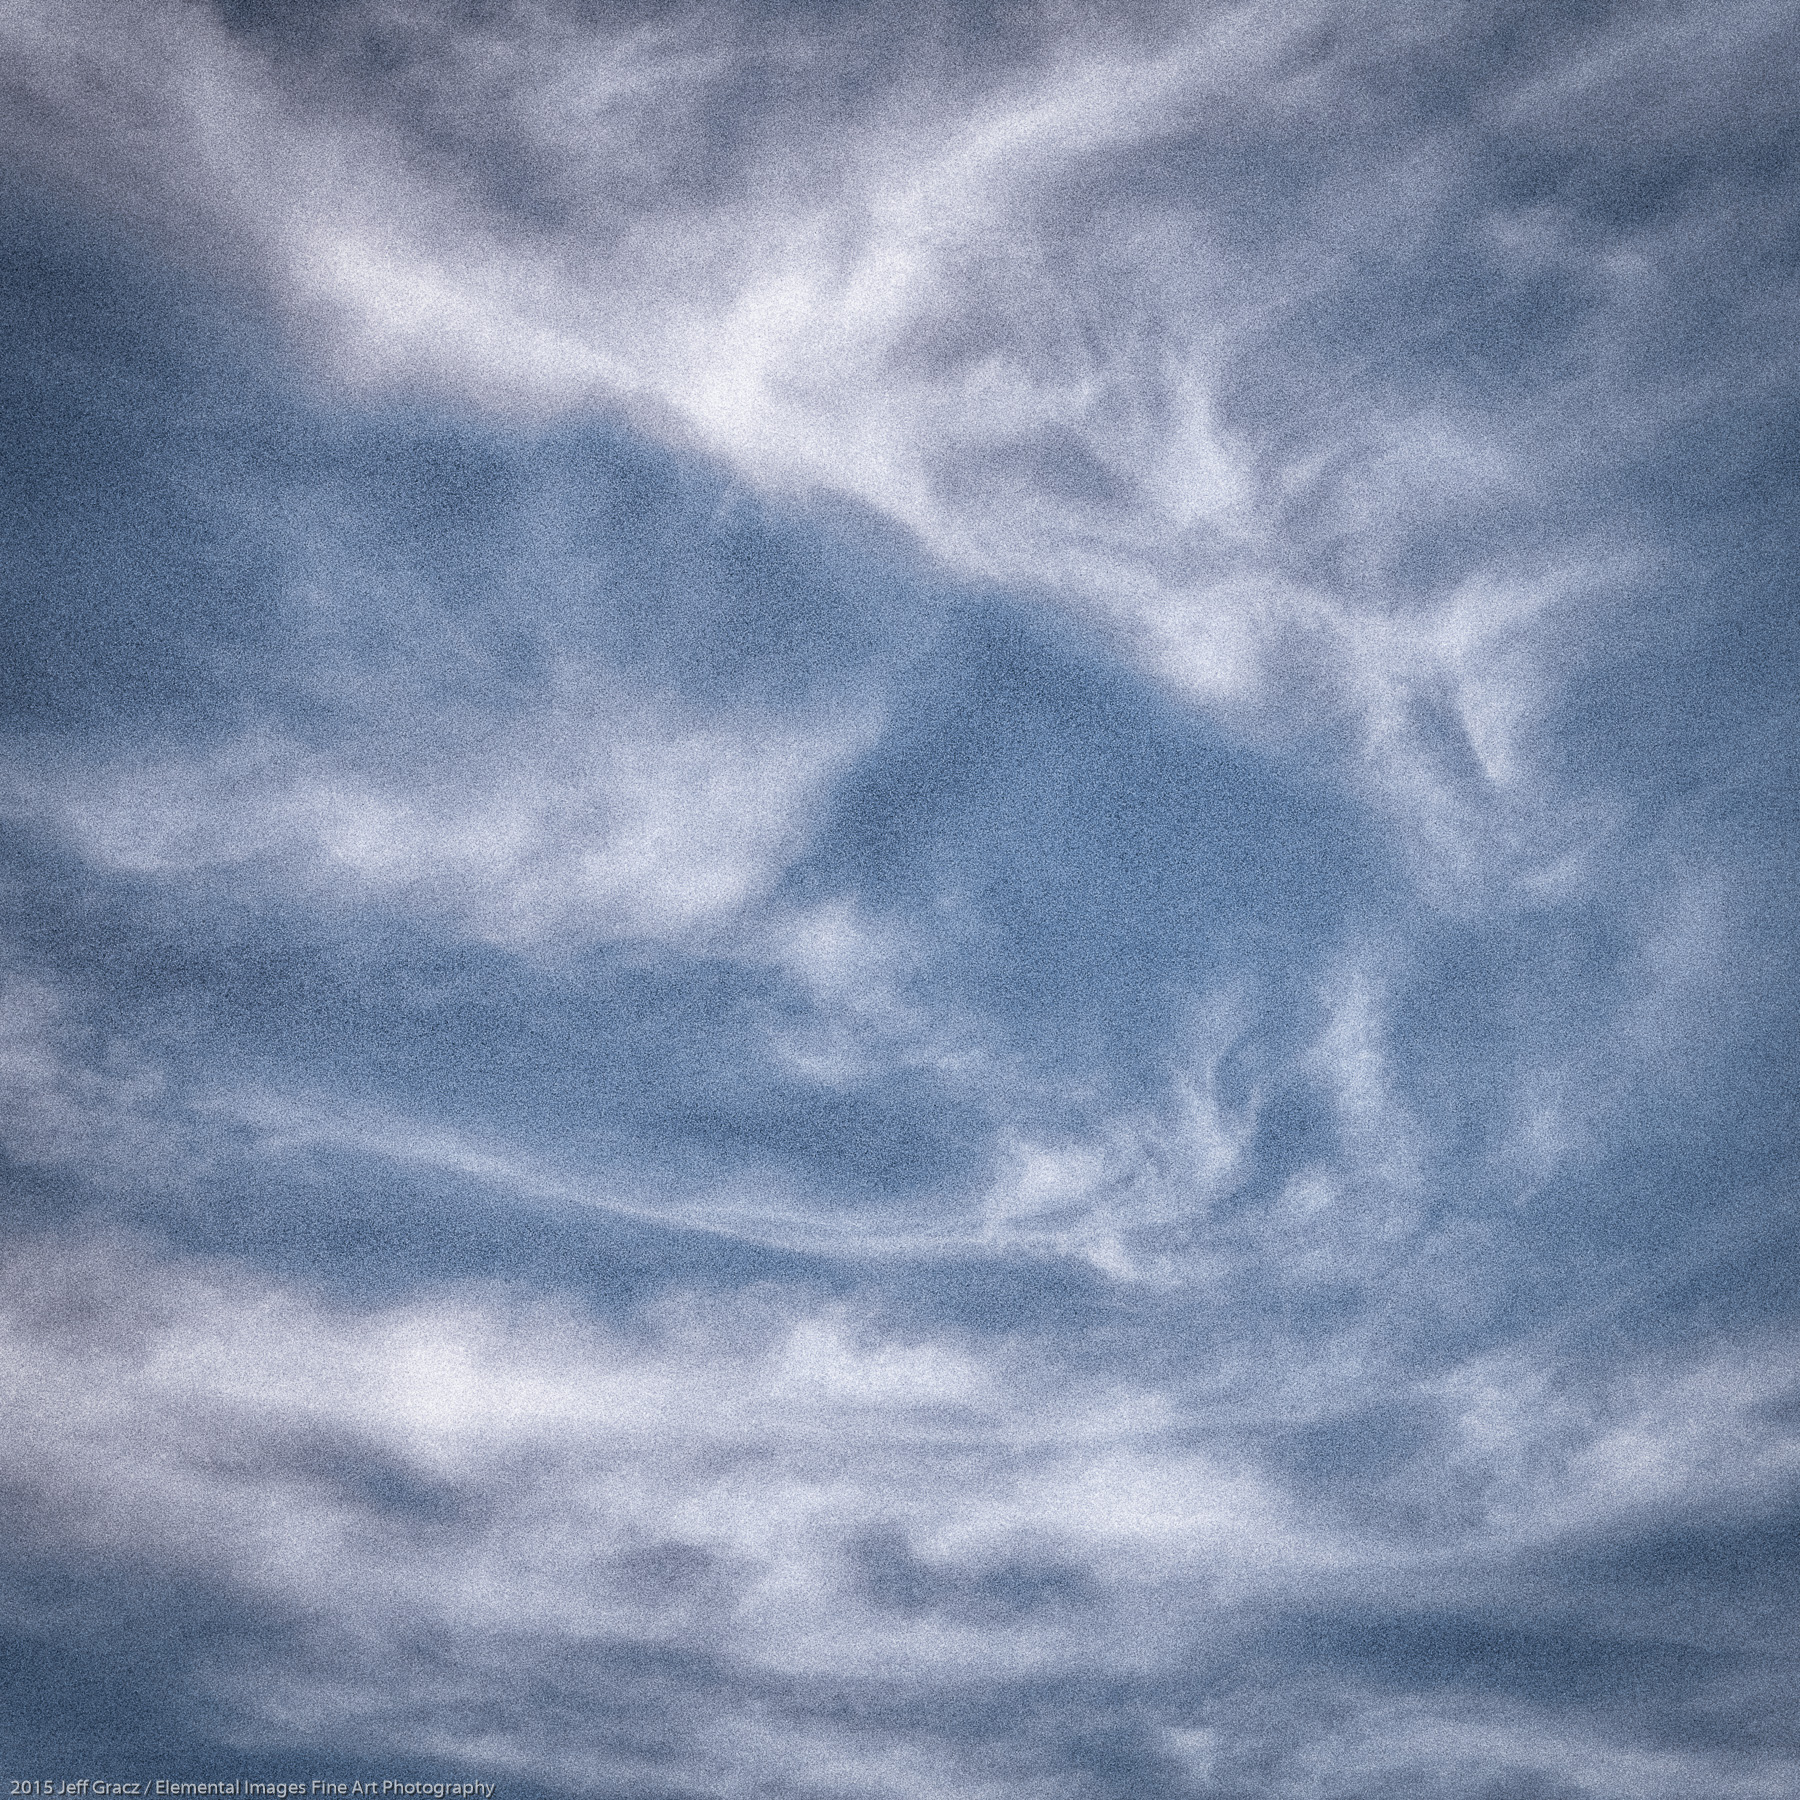 Skyscapes #3 | Vancouver | WA | USA - © 2015 Jeff Gracz / Elemental Images Fine Art Photography - All Rights Reserved Worldwide